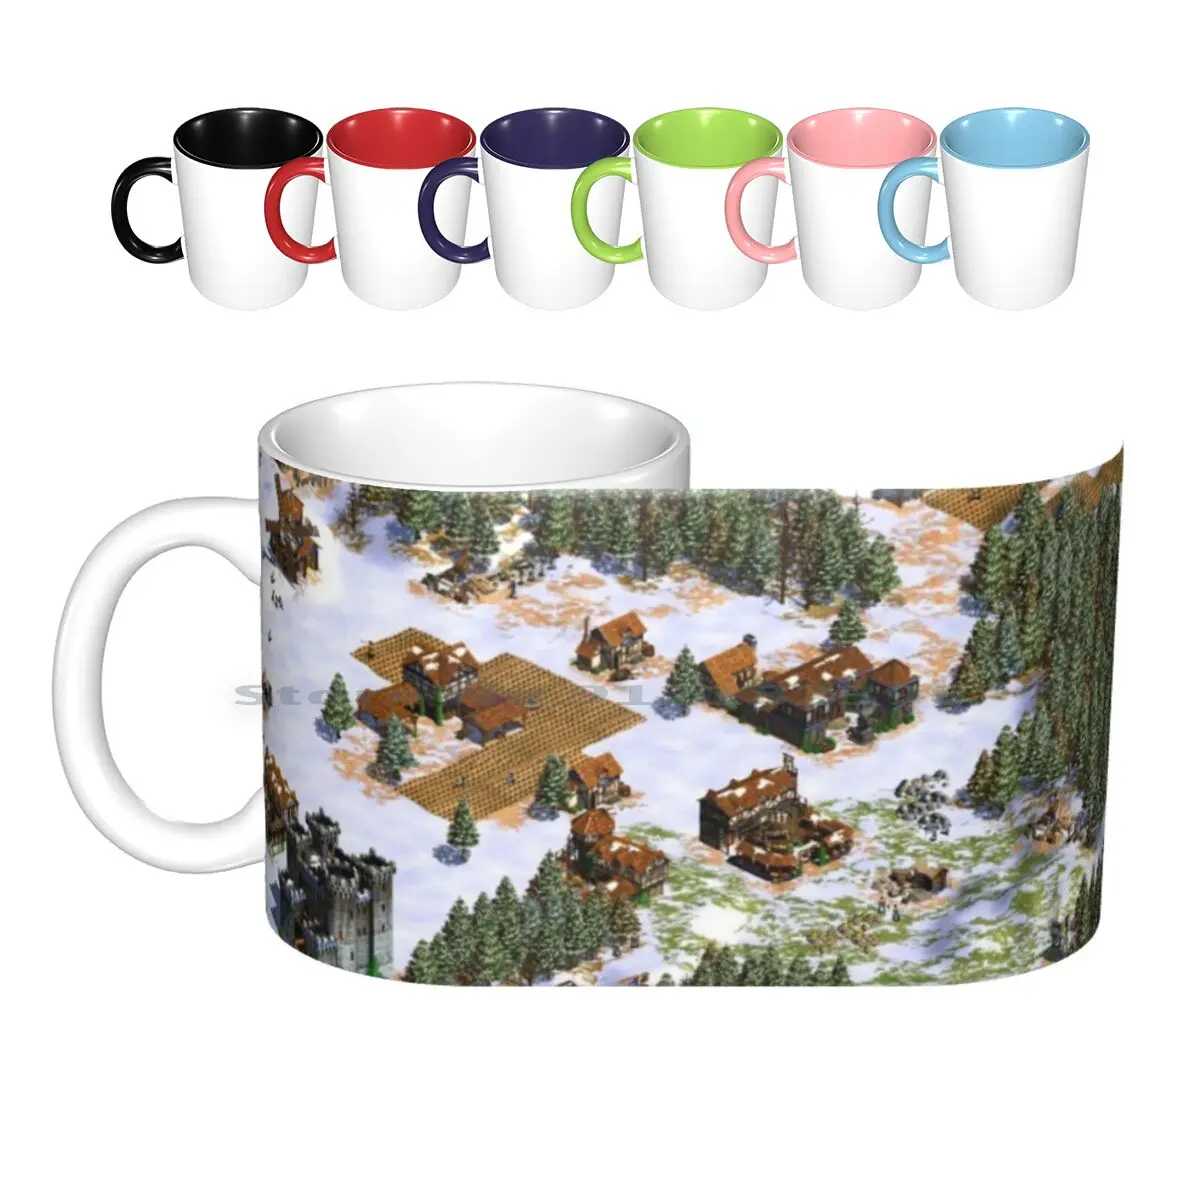 

Age Of Empires Snowy Landscape Cup Ceramic Mugs Coffee Cups Milk Tea Mug Age Of Empires Gaming Christmas Nerd Vintage Hipster